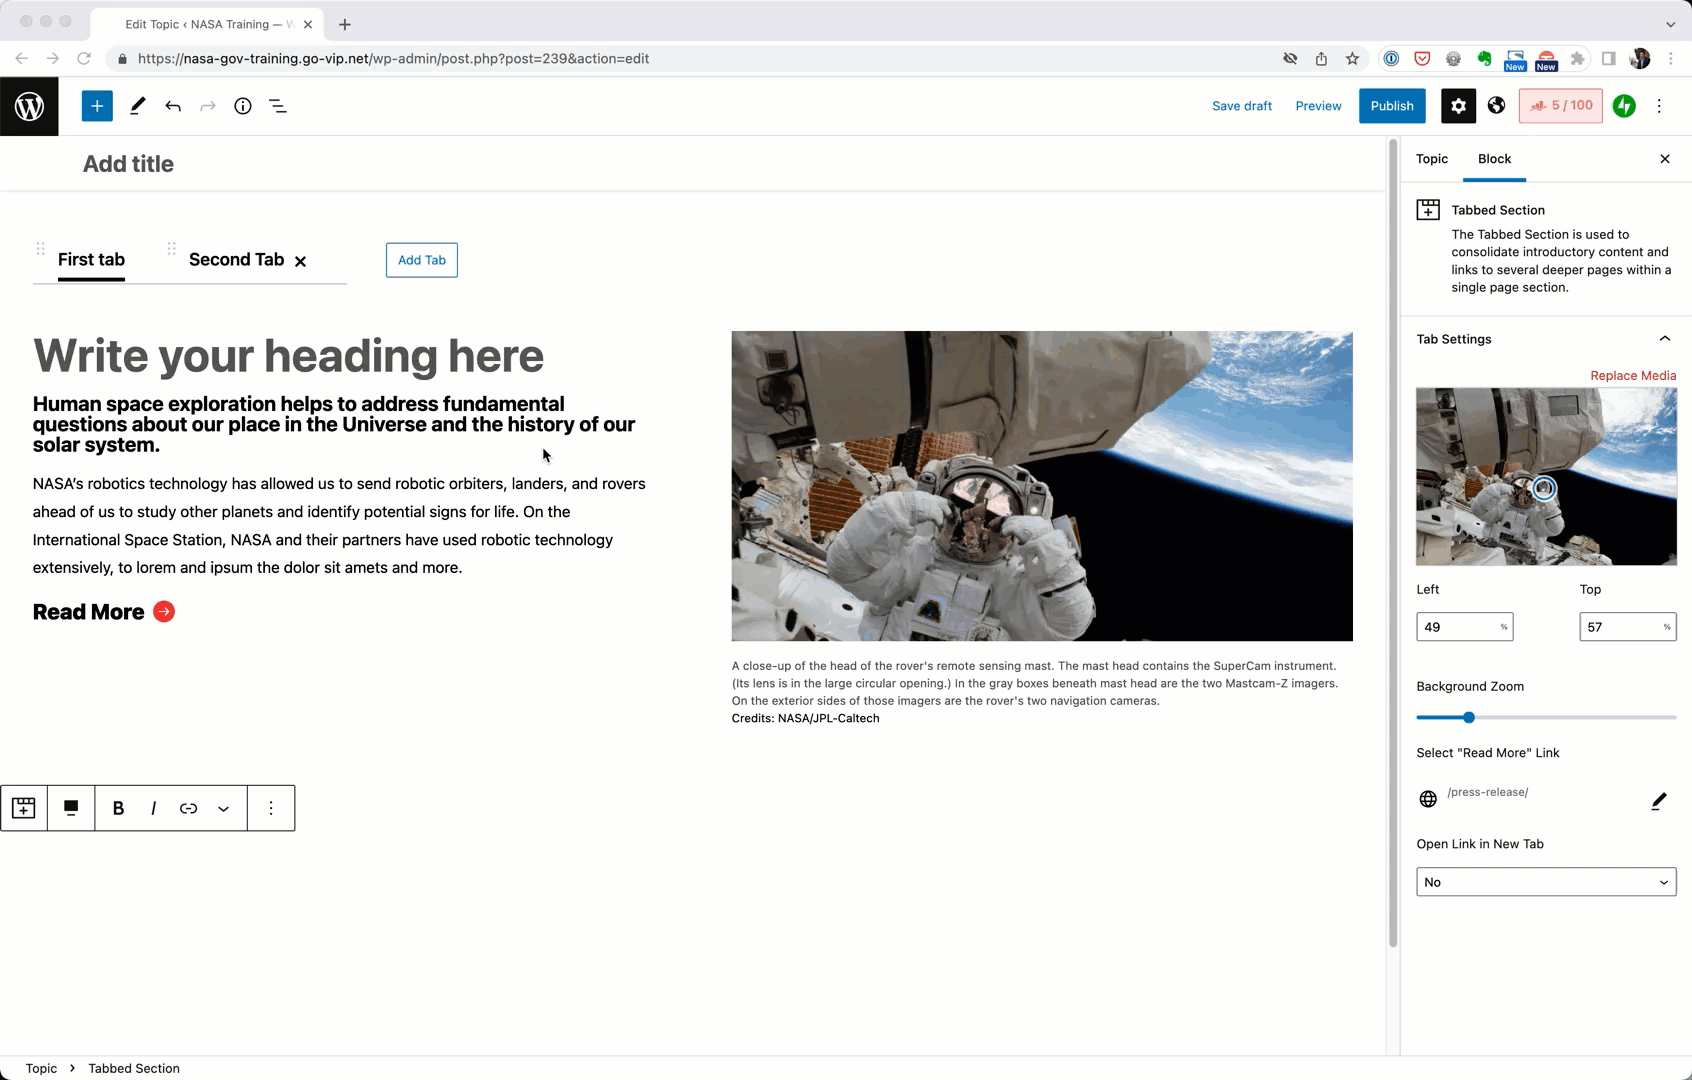 Animation of the tabbed content gutenberg block of the NASA WordPress CMS